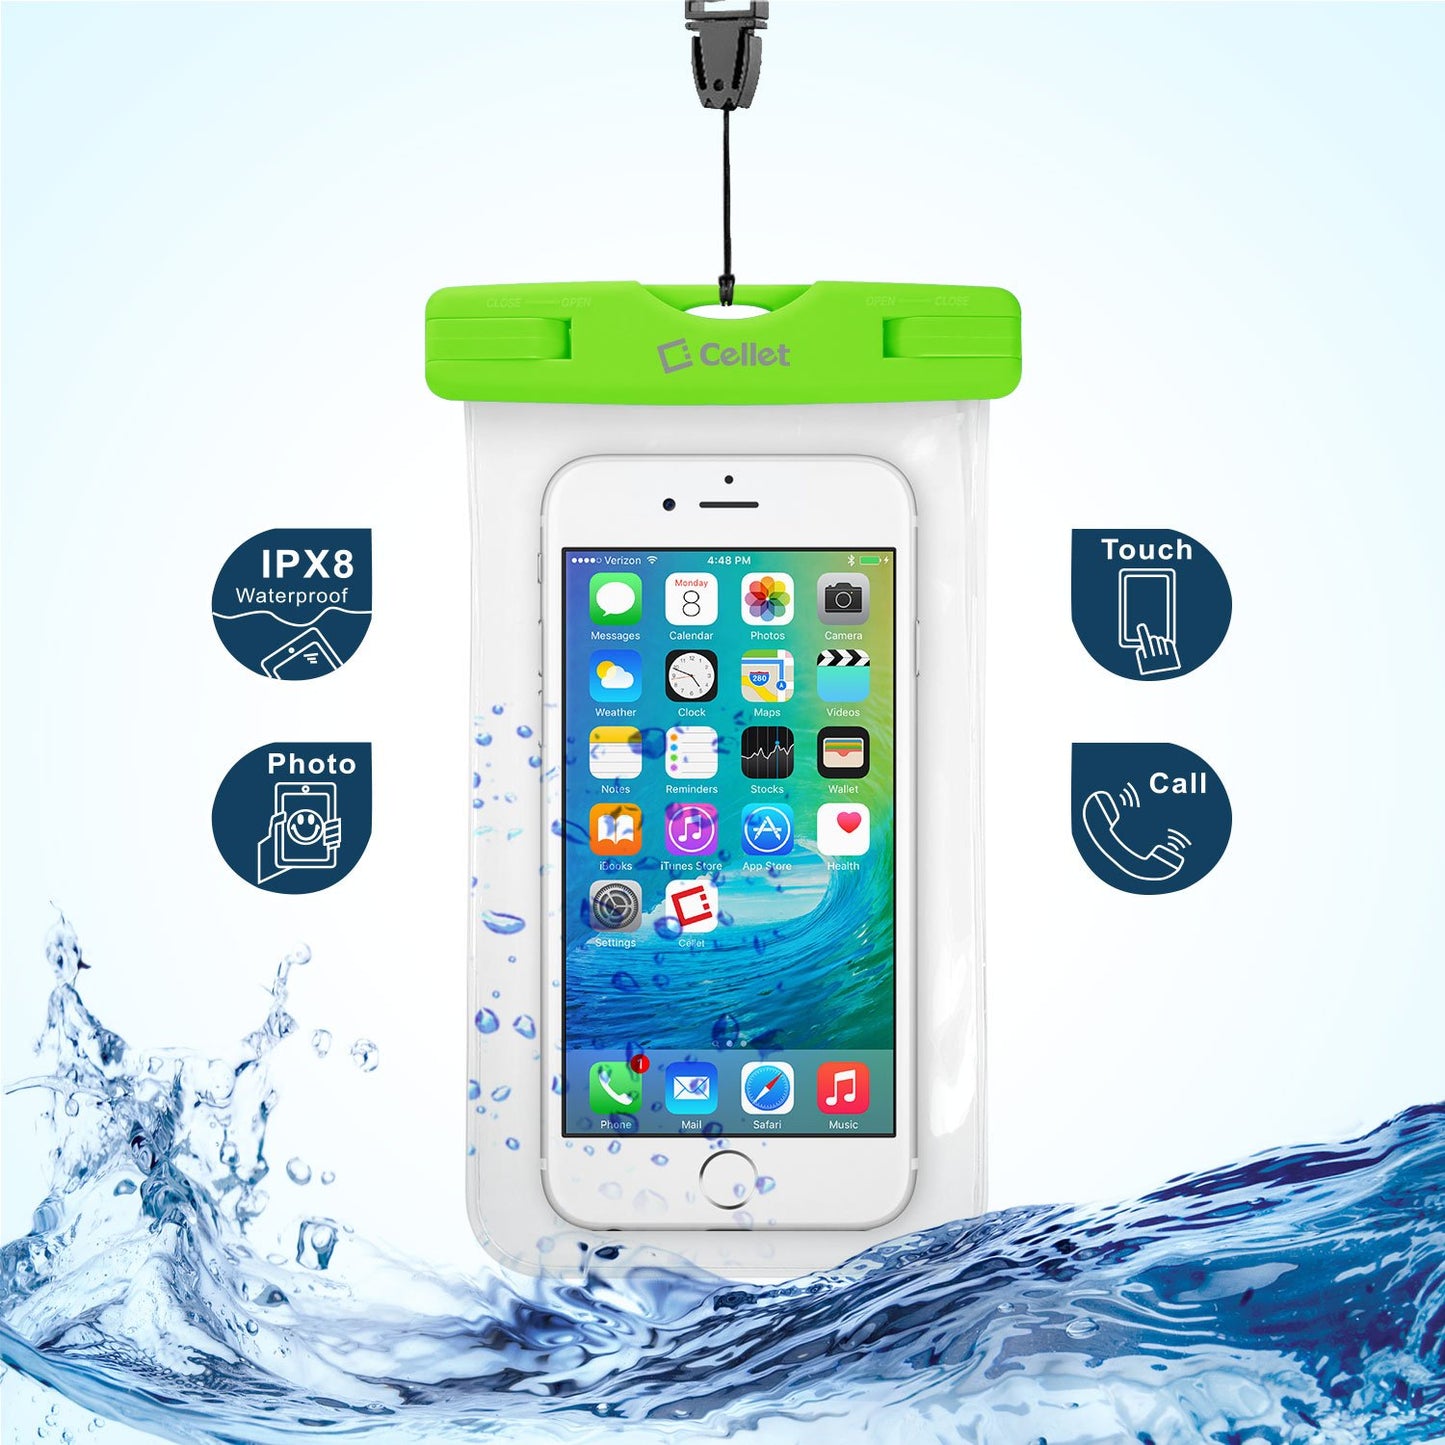 WATER1GR - Cellet Universal IPX8 Waterproof Case for Apple iPhone 7 Plus, Digital Cameras, MP3 Players and More - Green